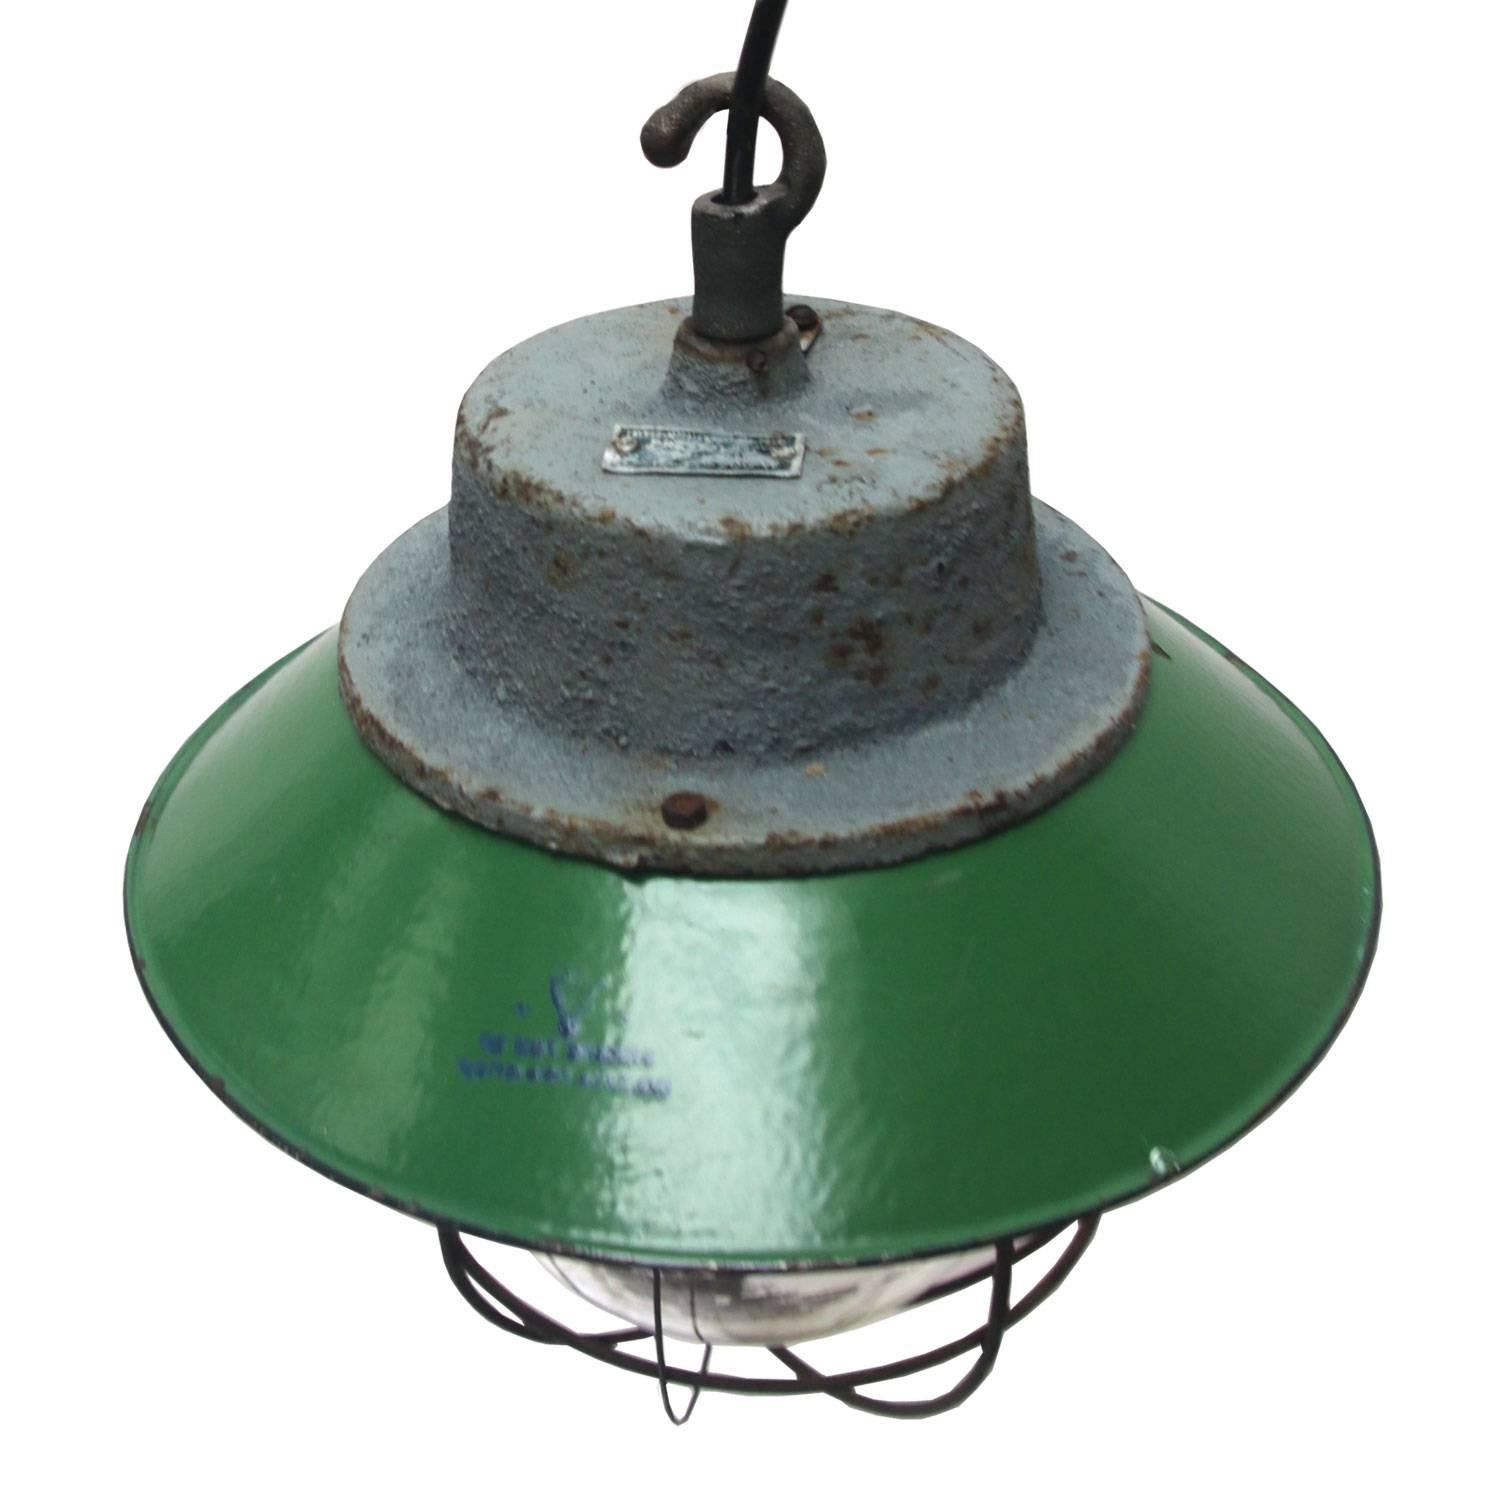 Green enamel. White interior.
Cast iron top. Clear glass. 

Weight: 5.0 kg / 11 lb

Priced per individual item. All lamps have been made suitable by international standards for incandescent light bulbs, energy-efficient and LED bulbs. E26/E27 bulb